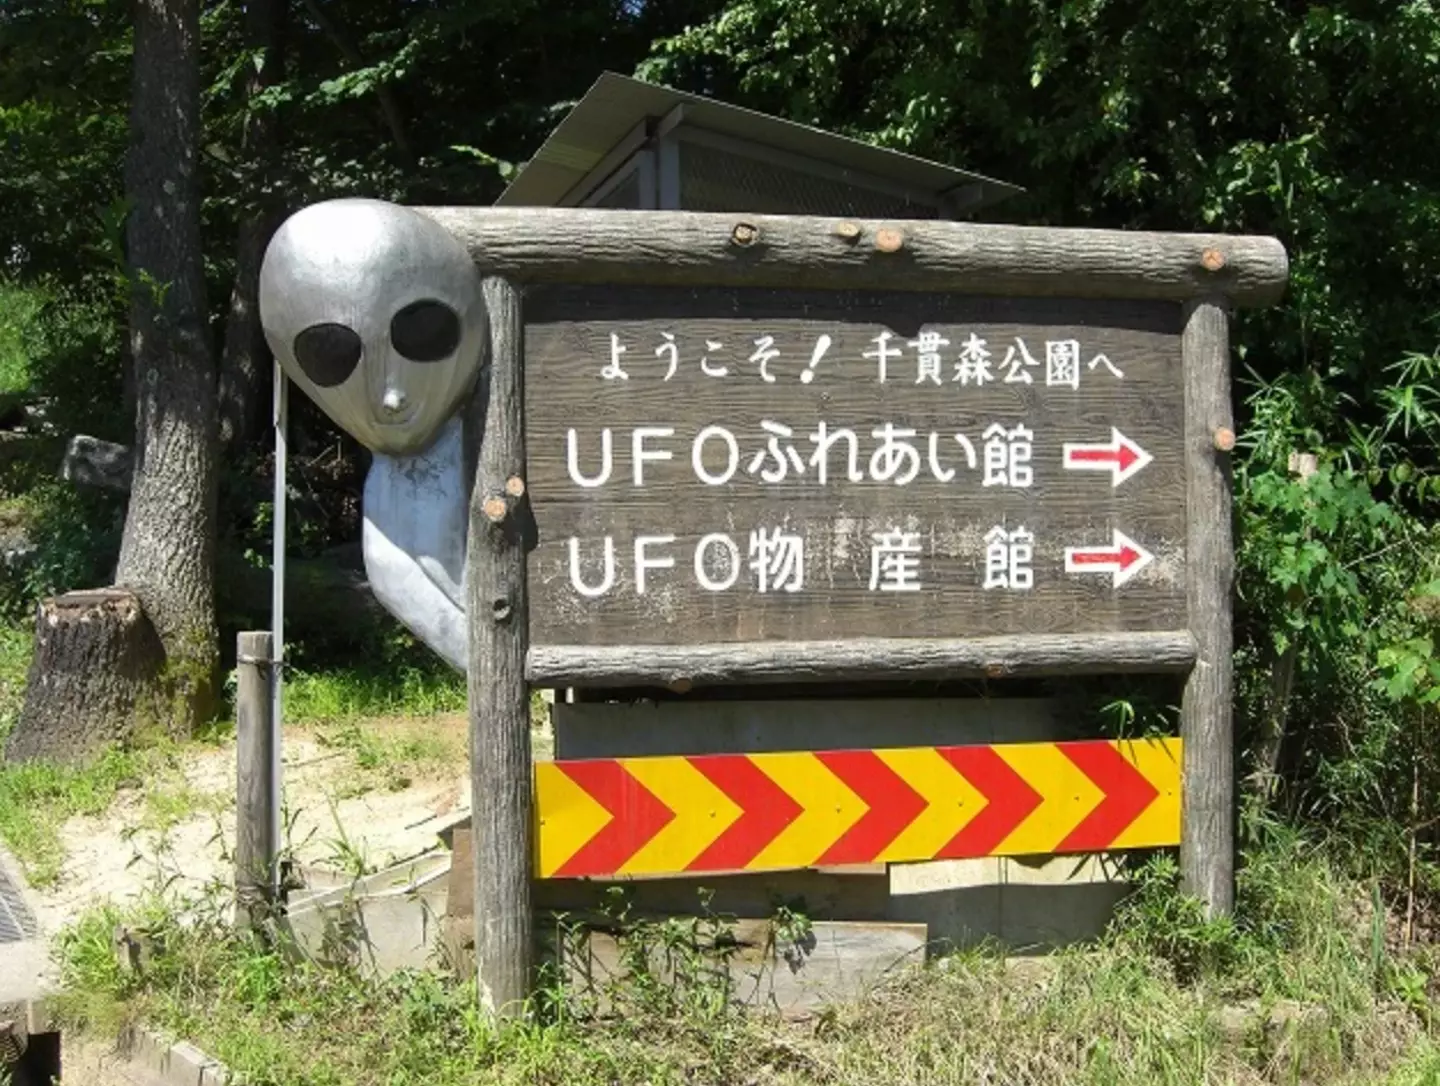 The town's UFO laboratory claims to have investigated a staggering 452 sightings in the area.